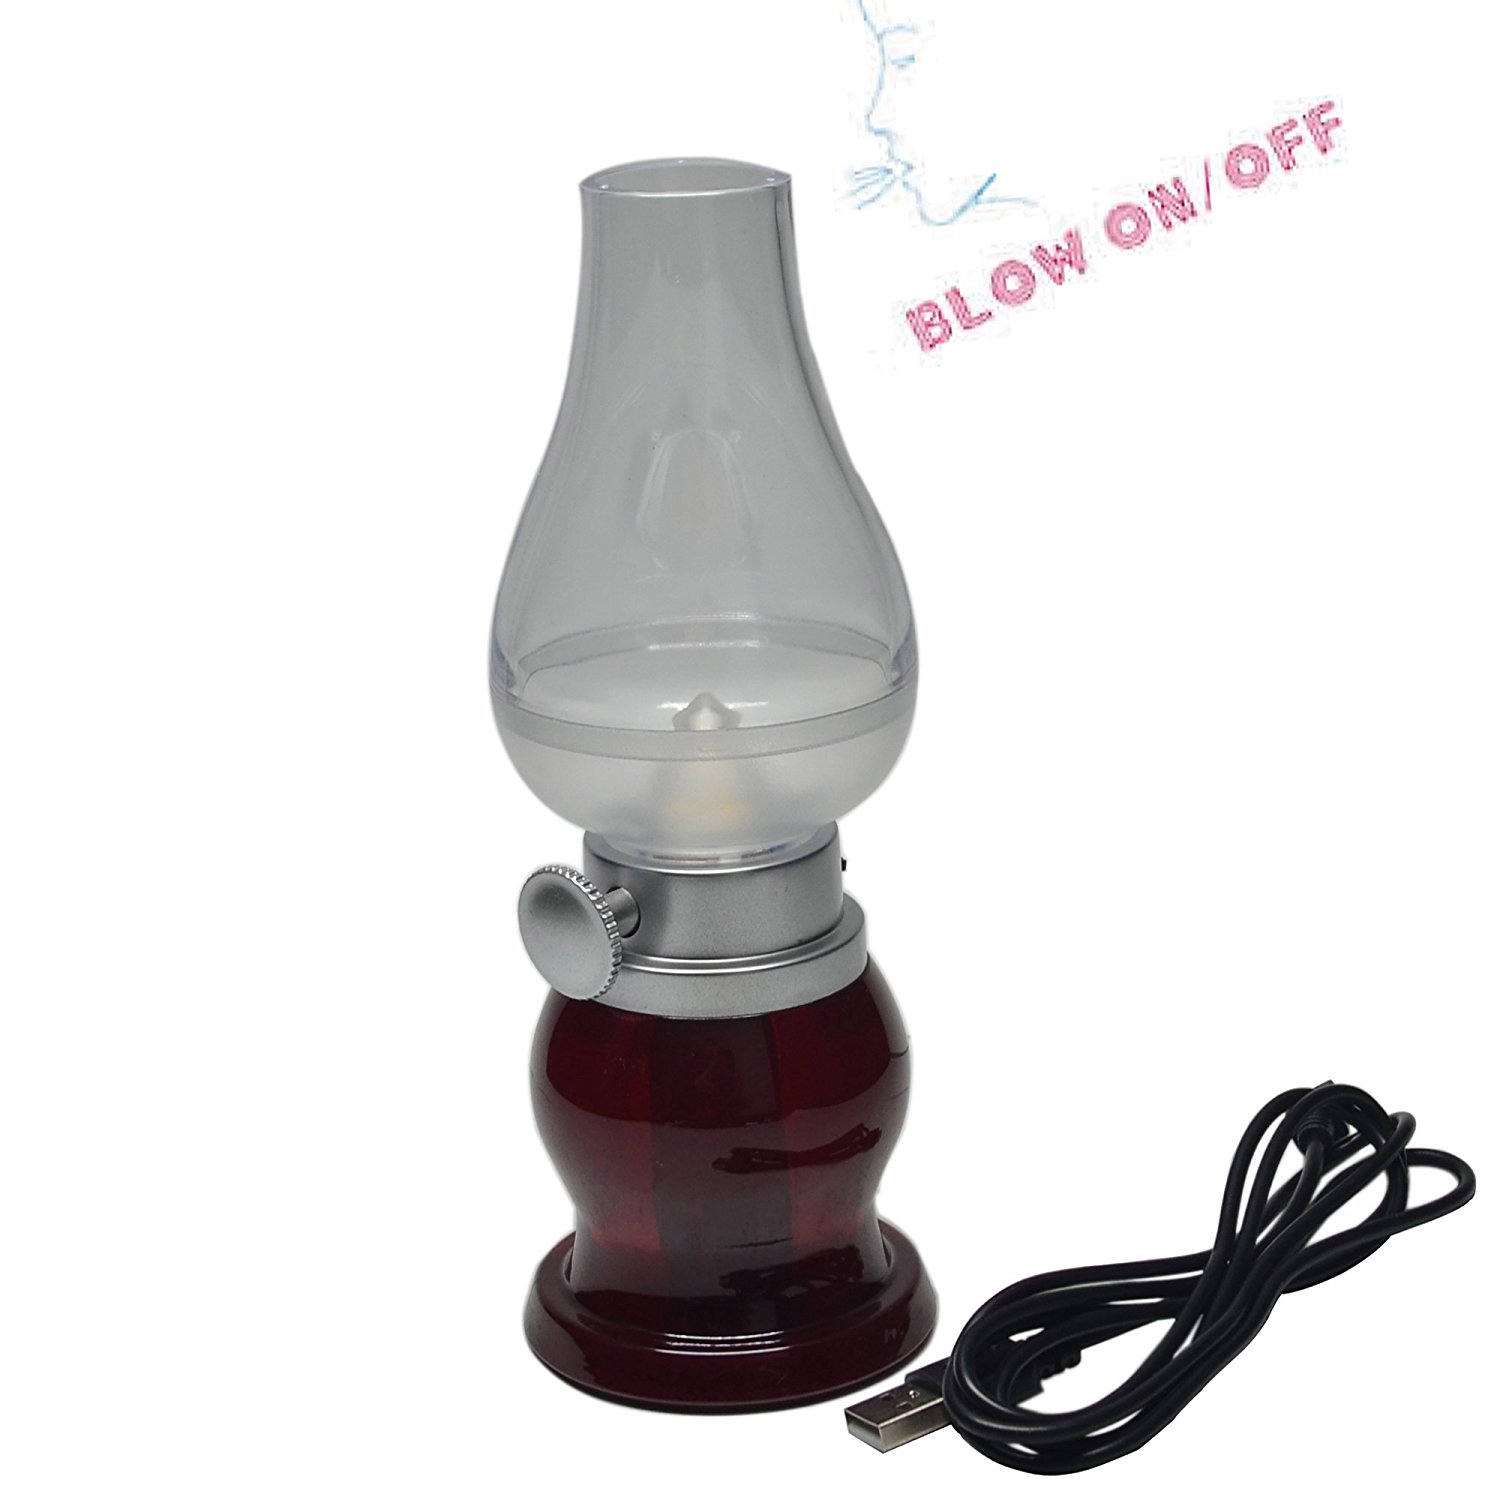 Vintage Bedside Lamp w/Blow ON/OFF Control w/Dimmer - RED